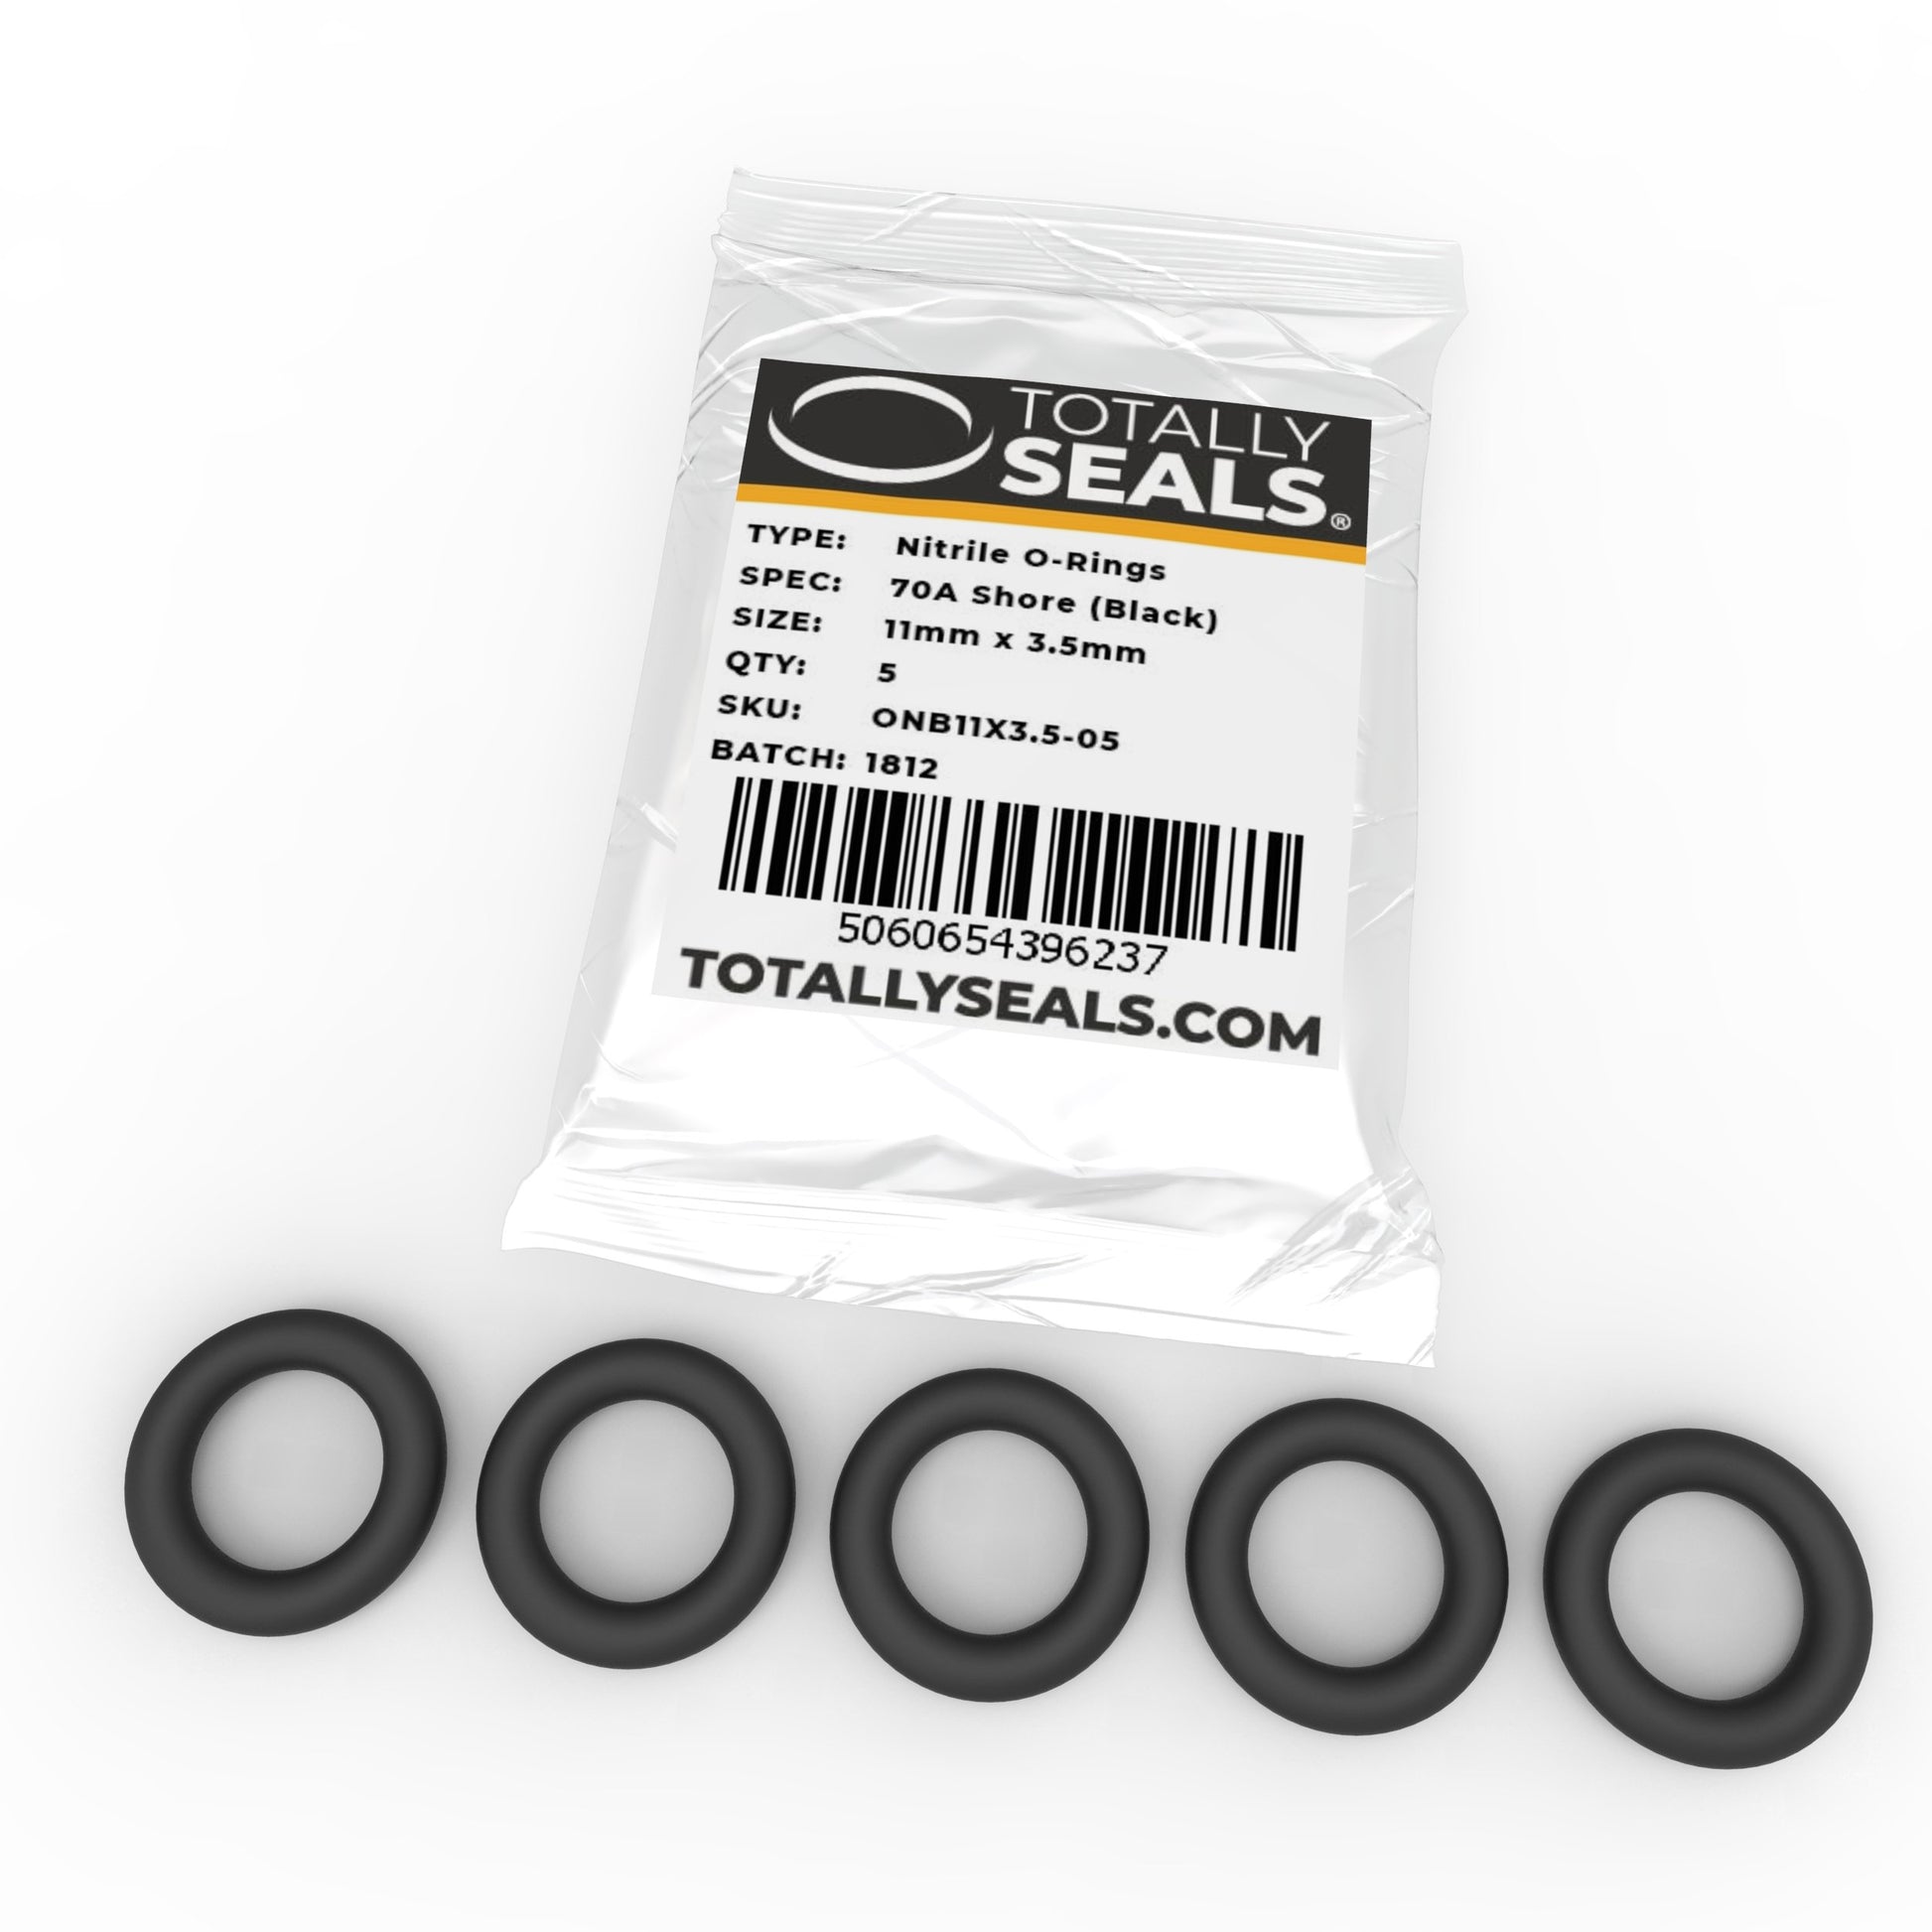 11mm x 3.5mm (18mm OD) Nitrile O-Rings - Totally Seals®